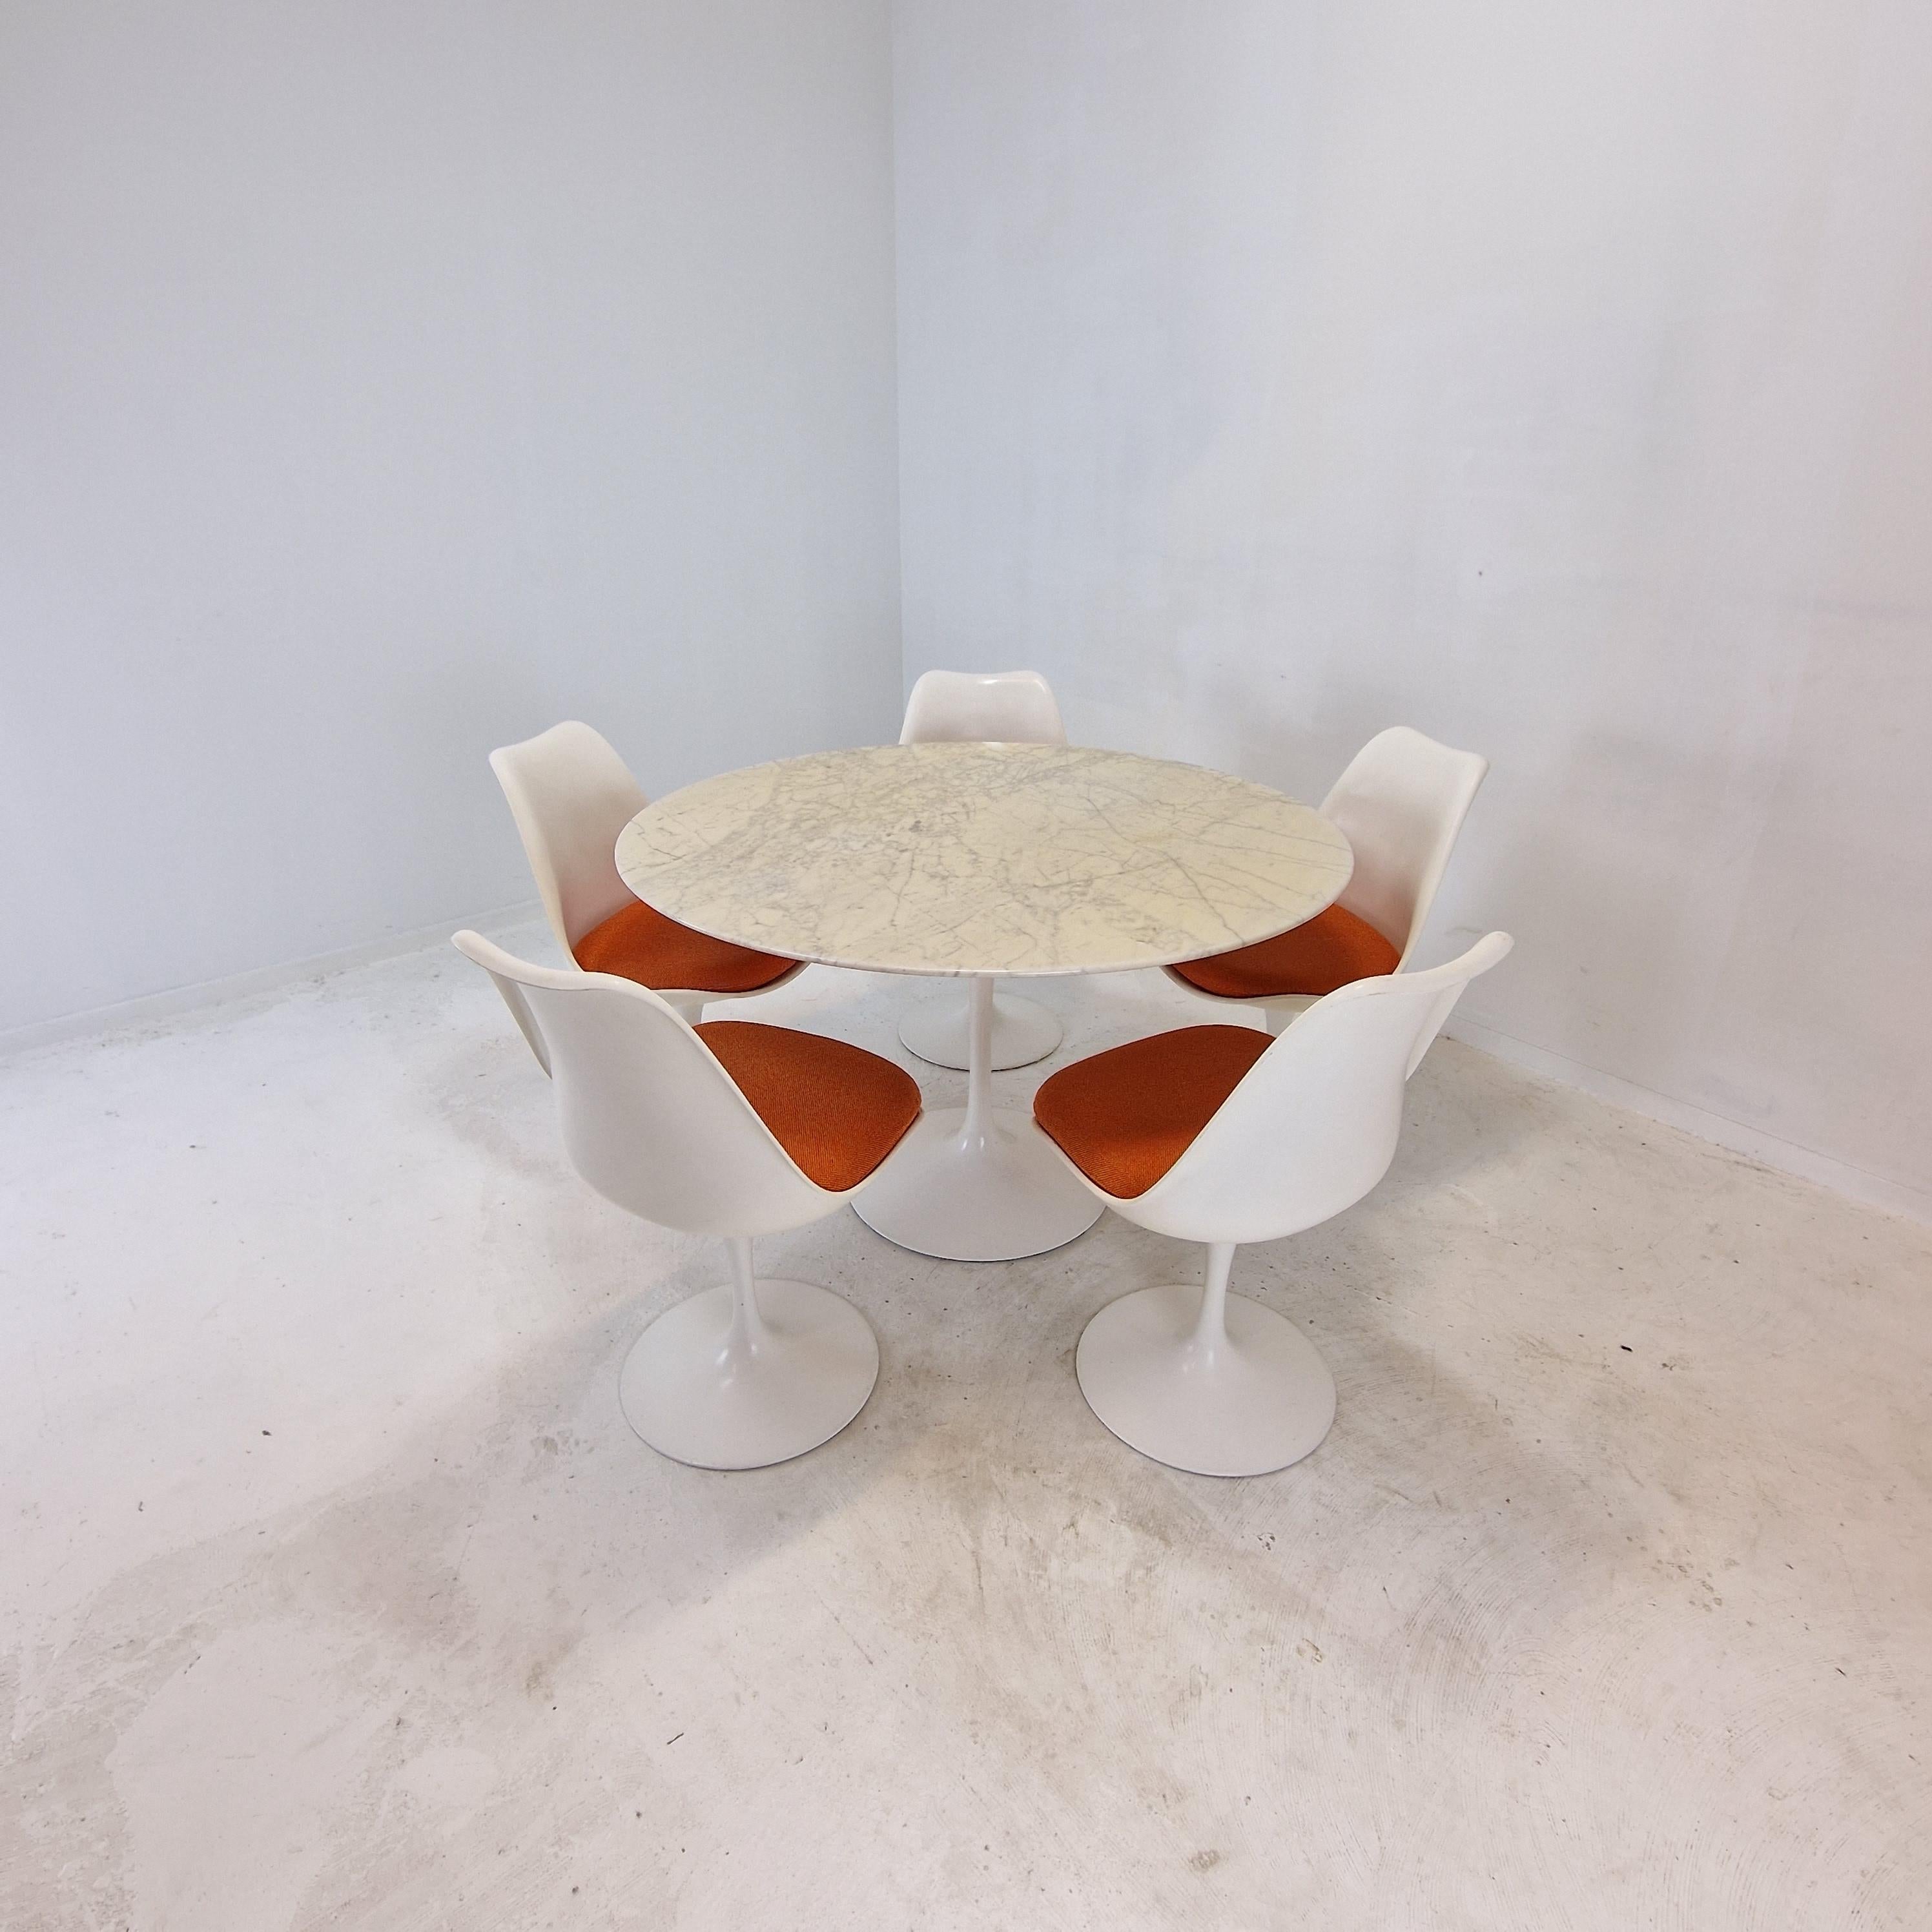 Magnificent and fully original Tulip dining set designed by Eero Saarinen.
It is produced by Knoll International in the 1960s. 

The set consists of 5 original tulip chairs and the original matching round marble table, originally marked.

The chairs